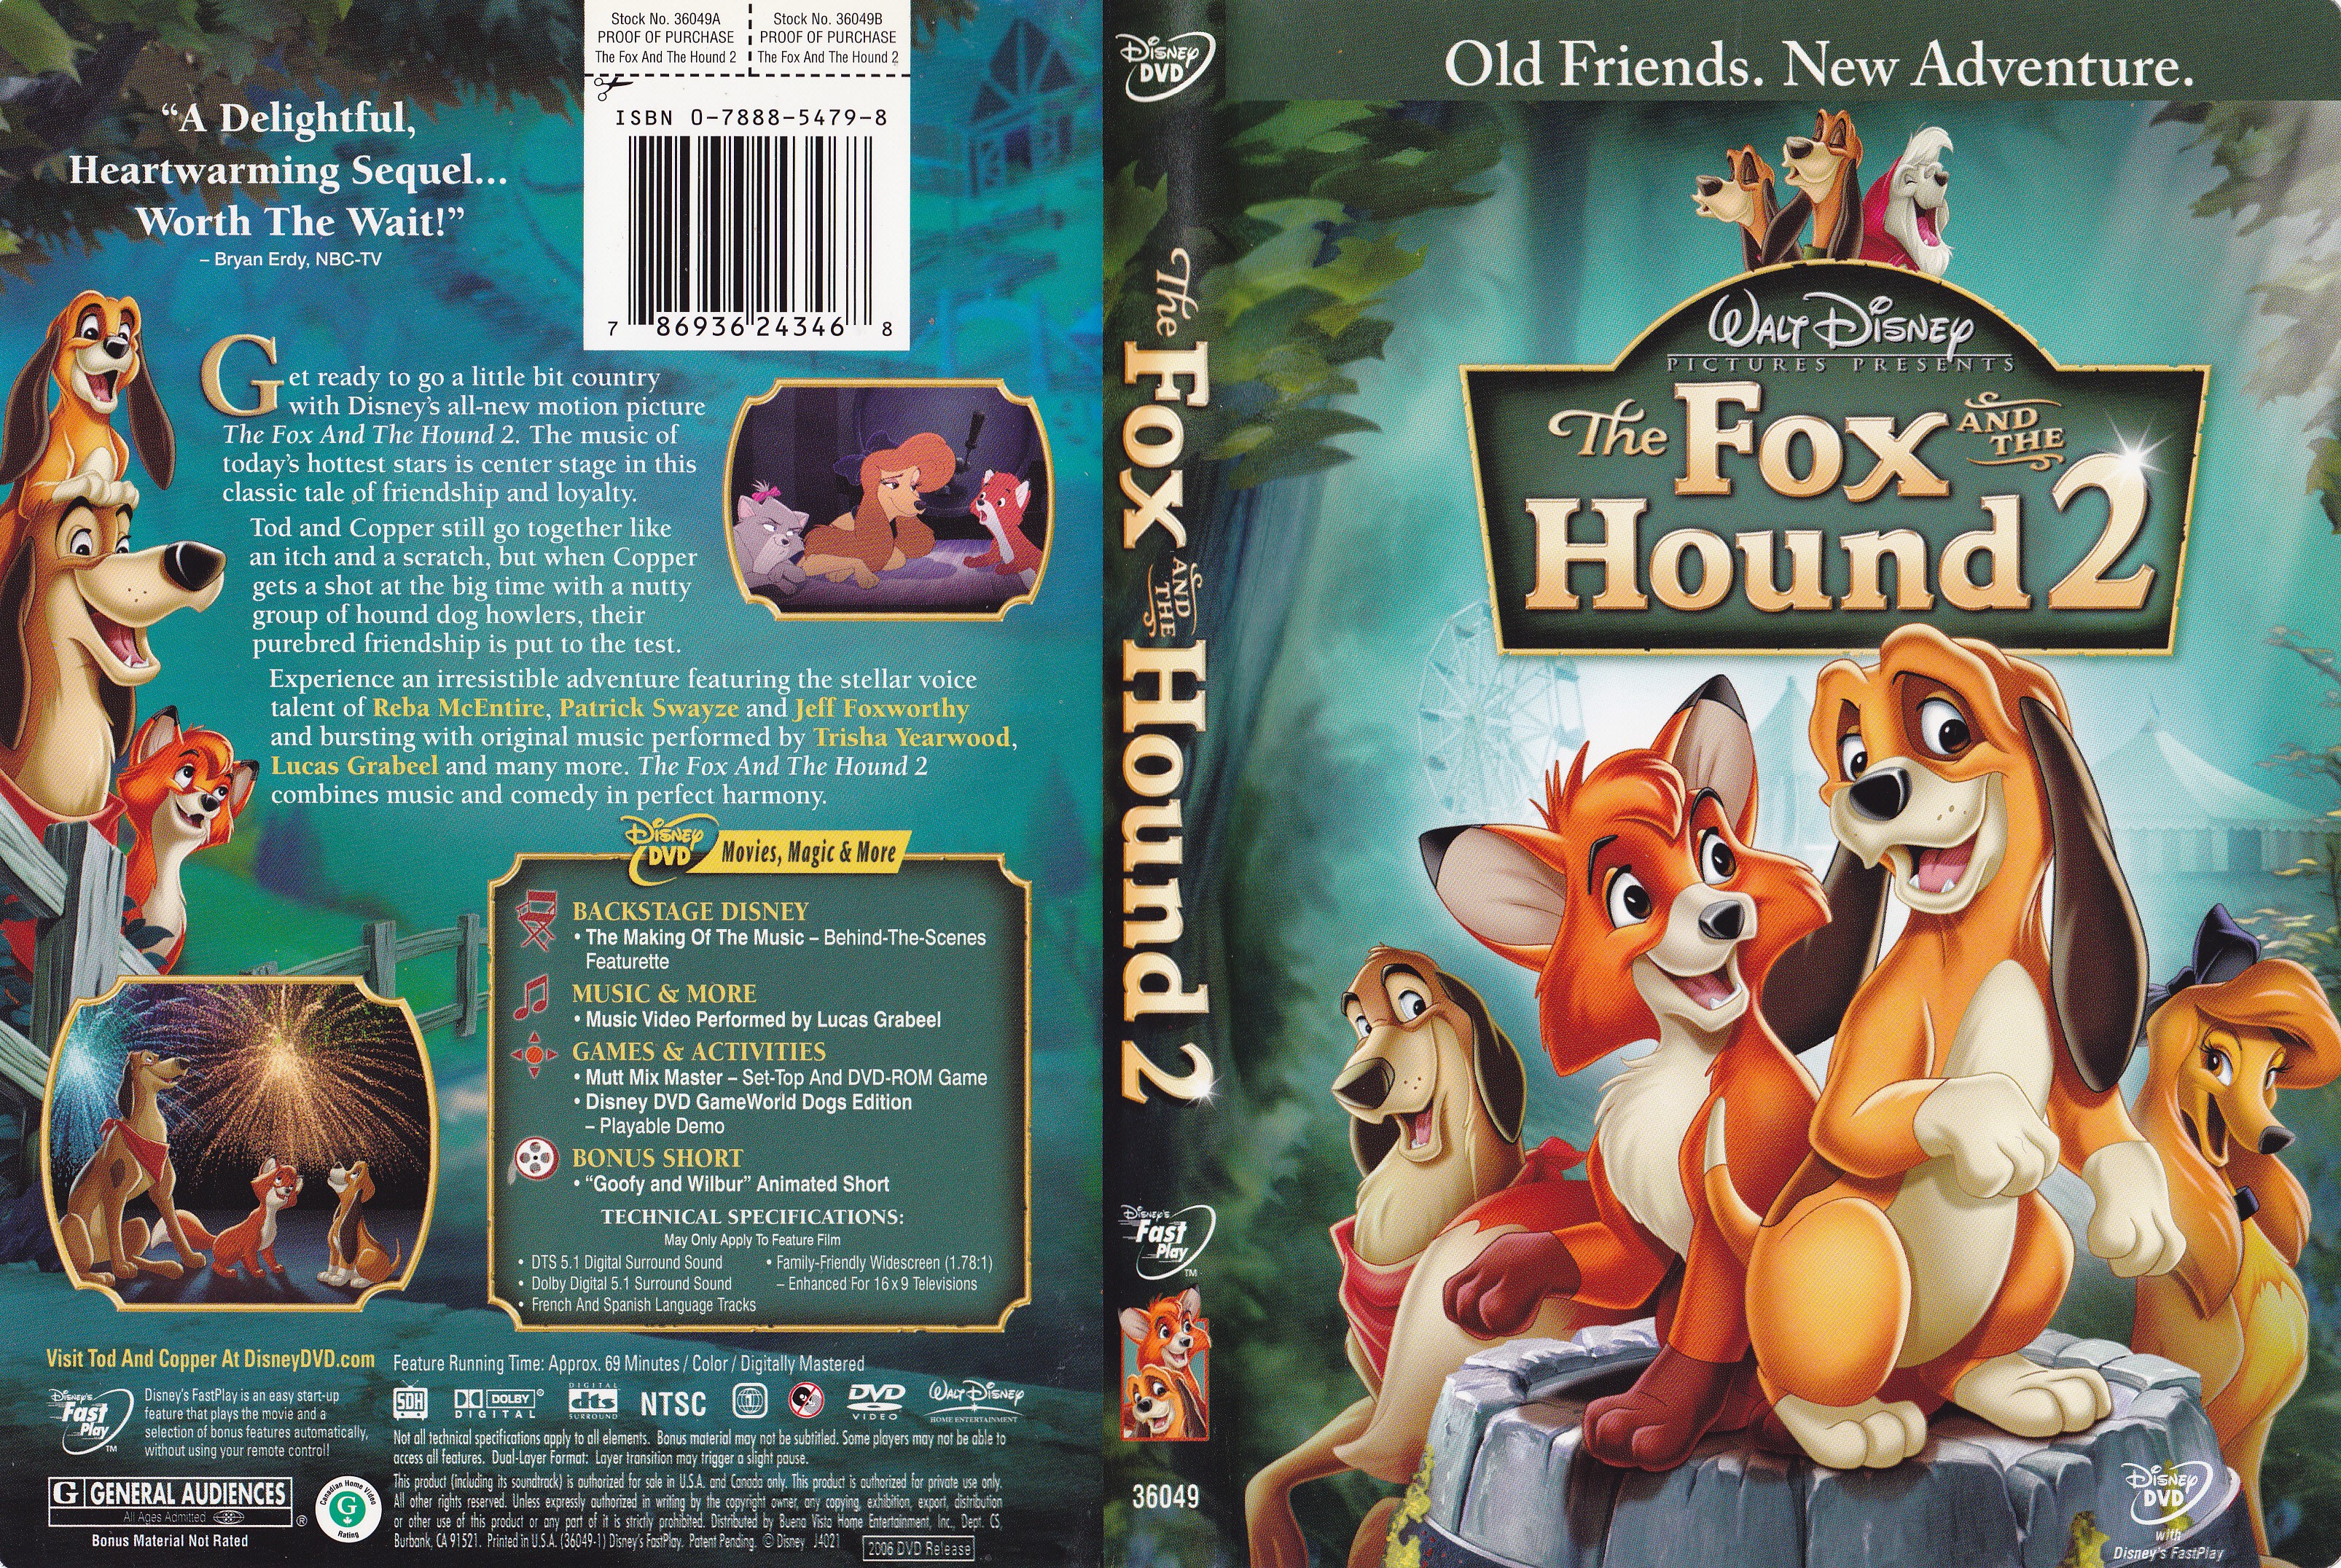 Jaquette DVD The fox and the hound 2 - Rox et rouky 2 (Canadienne)